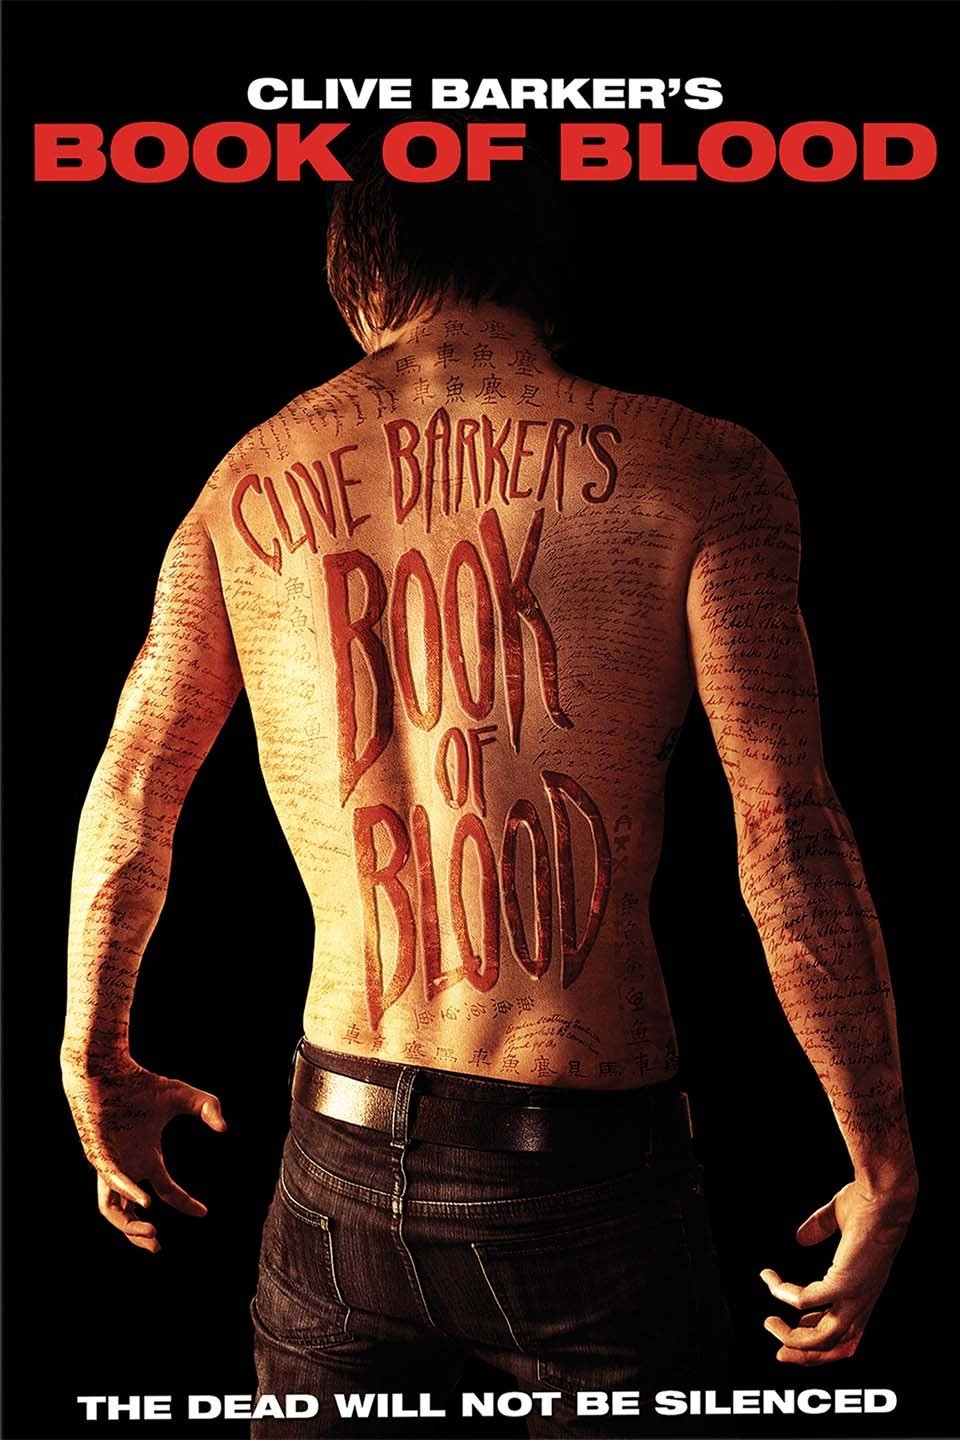 &amp;#208;&nbsp;&amp;#208;&amp;#208;&amp;#209;&amp;#131;&amp;#208;&amp;#209;&amp;#130;&amp;#208;&amp;#209;&amp;#130; &amp;#209;&amp;#129;&amp;#208;&amp;#190; &amp;#209;&amp;#129;&amp;#208;&amp;#208;&amp;#184;&amp;#208;&amp;#186;&amp;#208; &amp;#208;&amp;#208; BOOK OF BLOOD (2009)